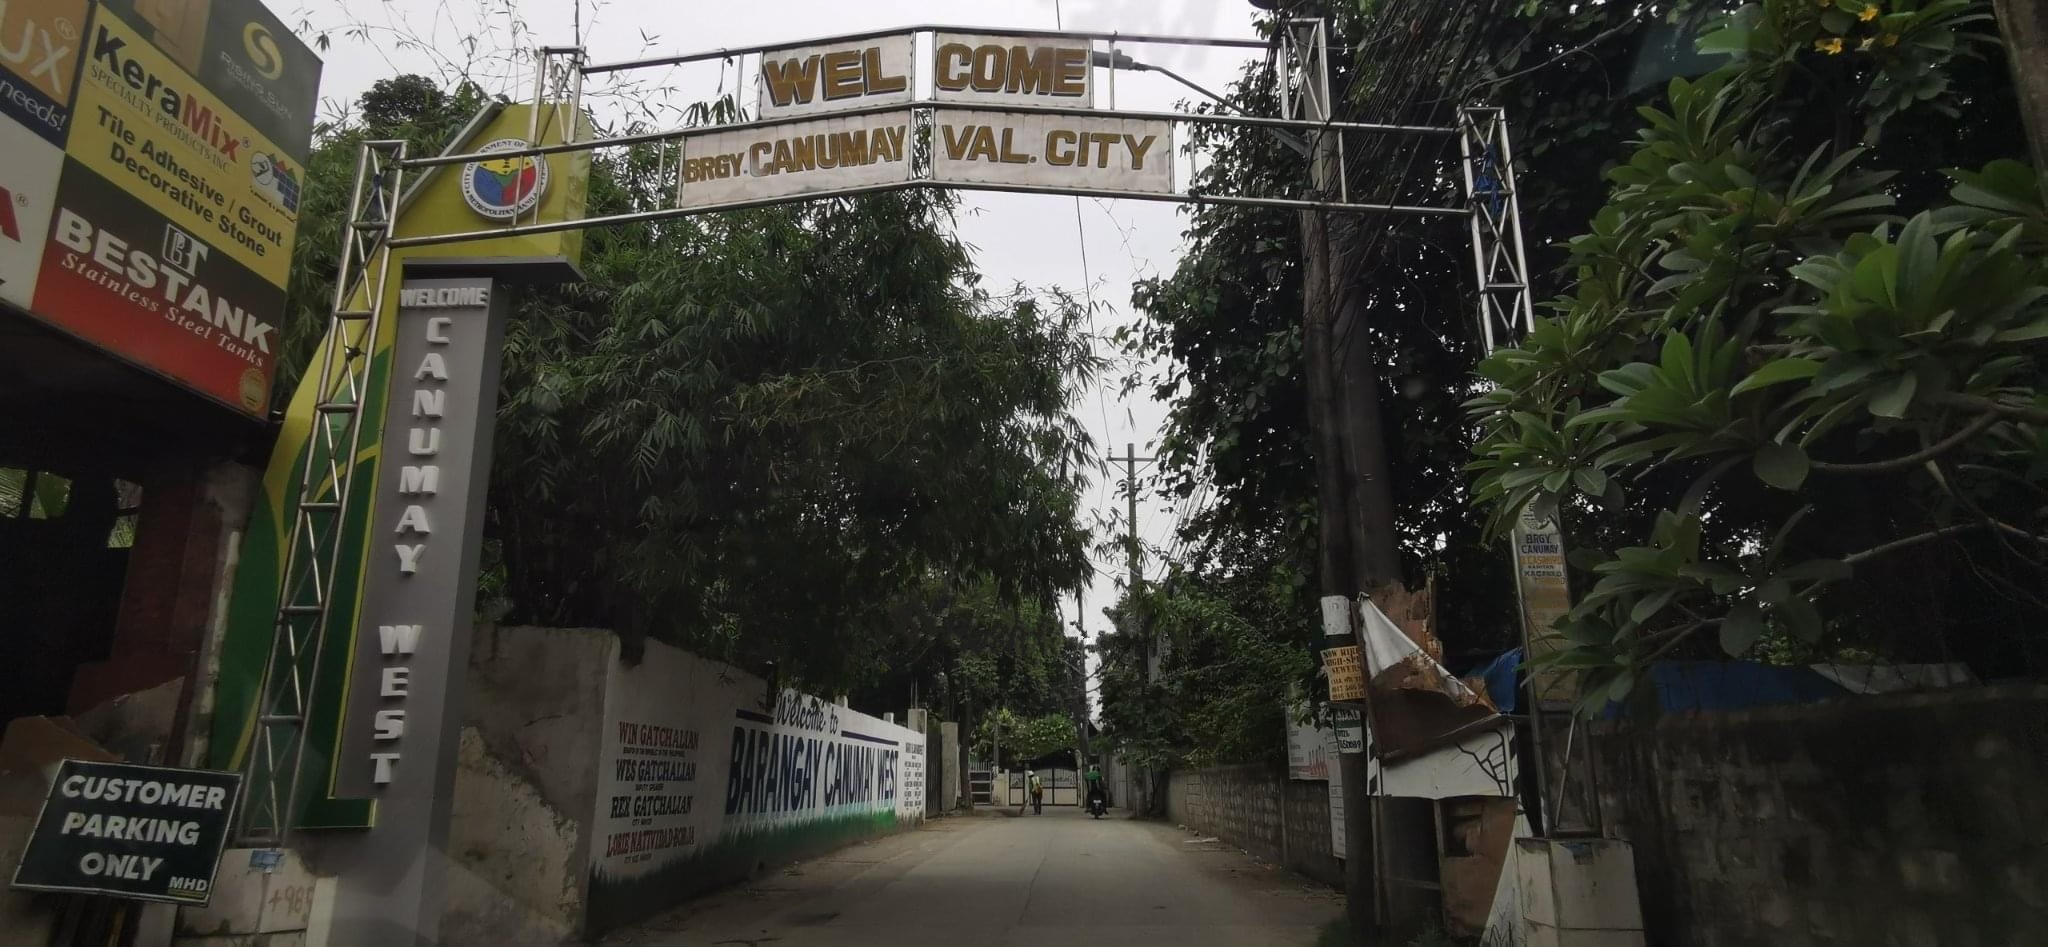 Canumay, Valenzuela – Factory Warehouse for Sale‼️